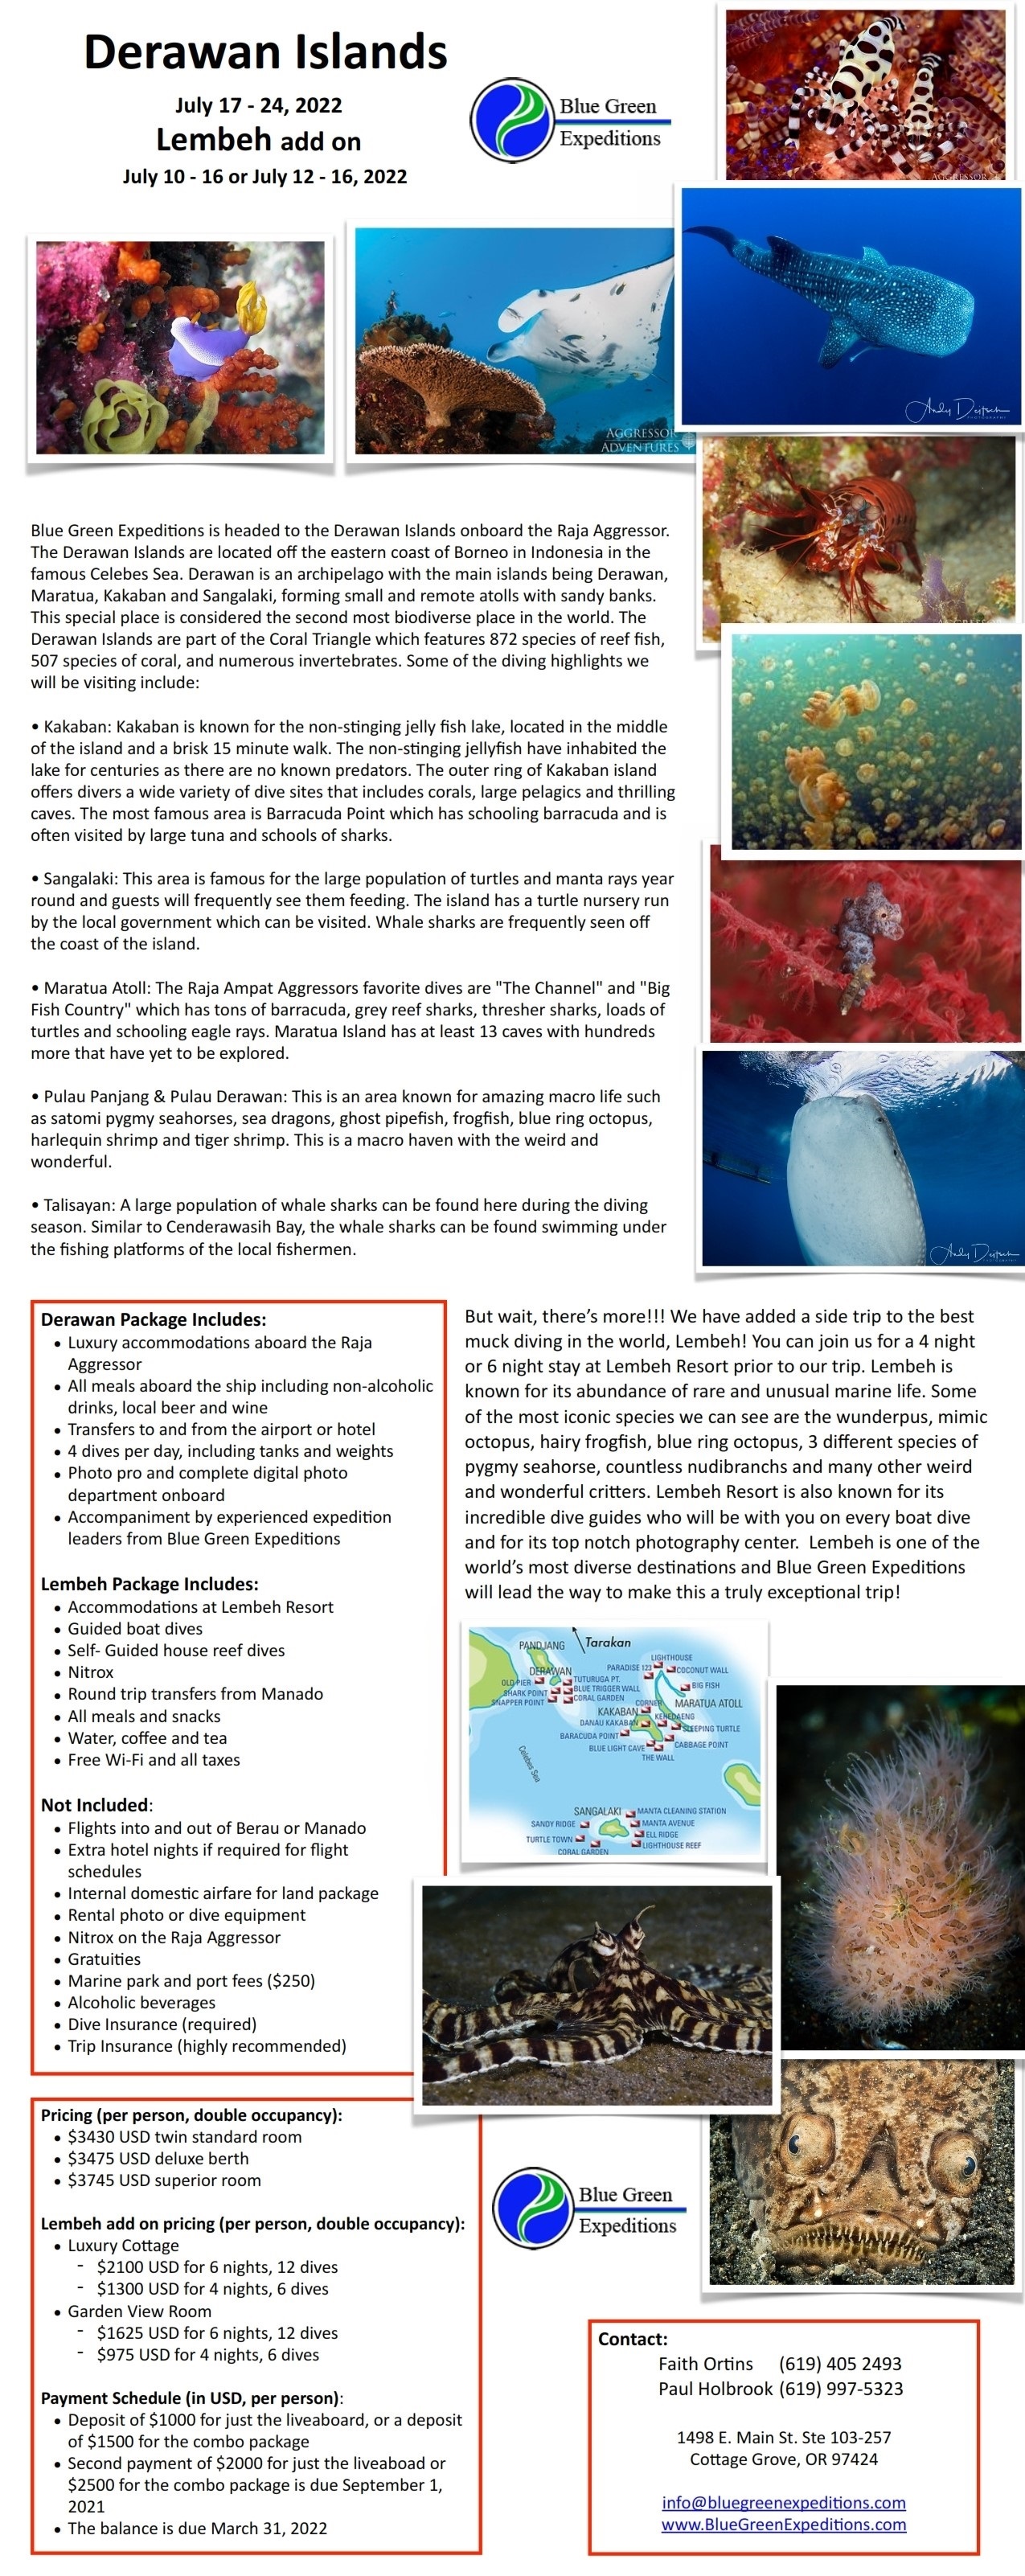 Derawan Expedition, July 17 - 24, 2022, cost and trip details. PDF flyer contains the same information.